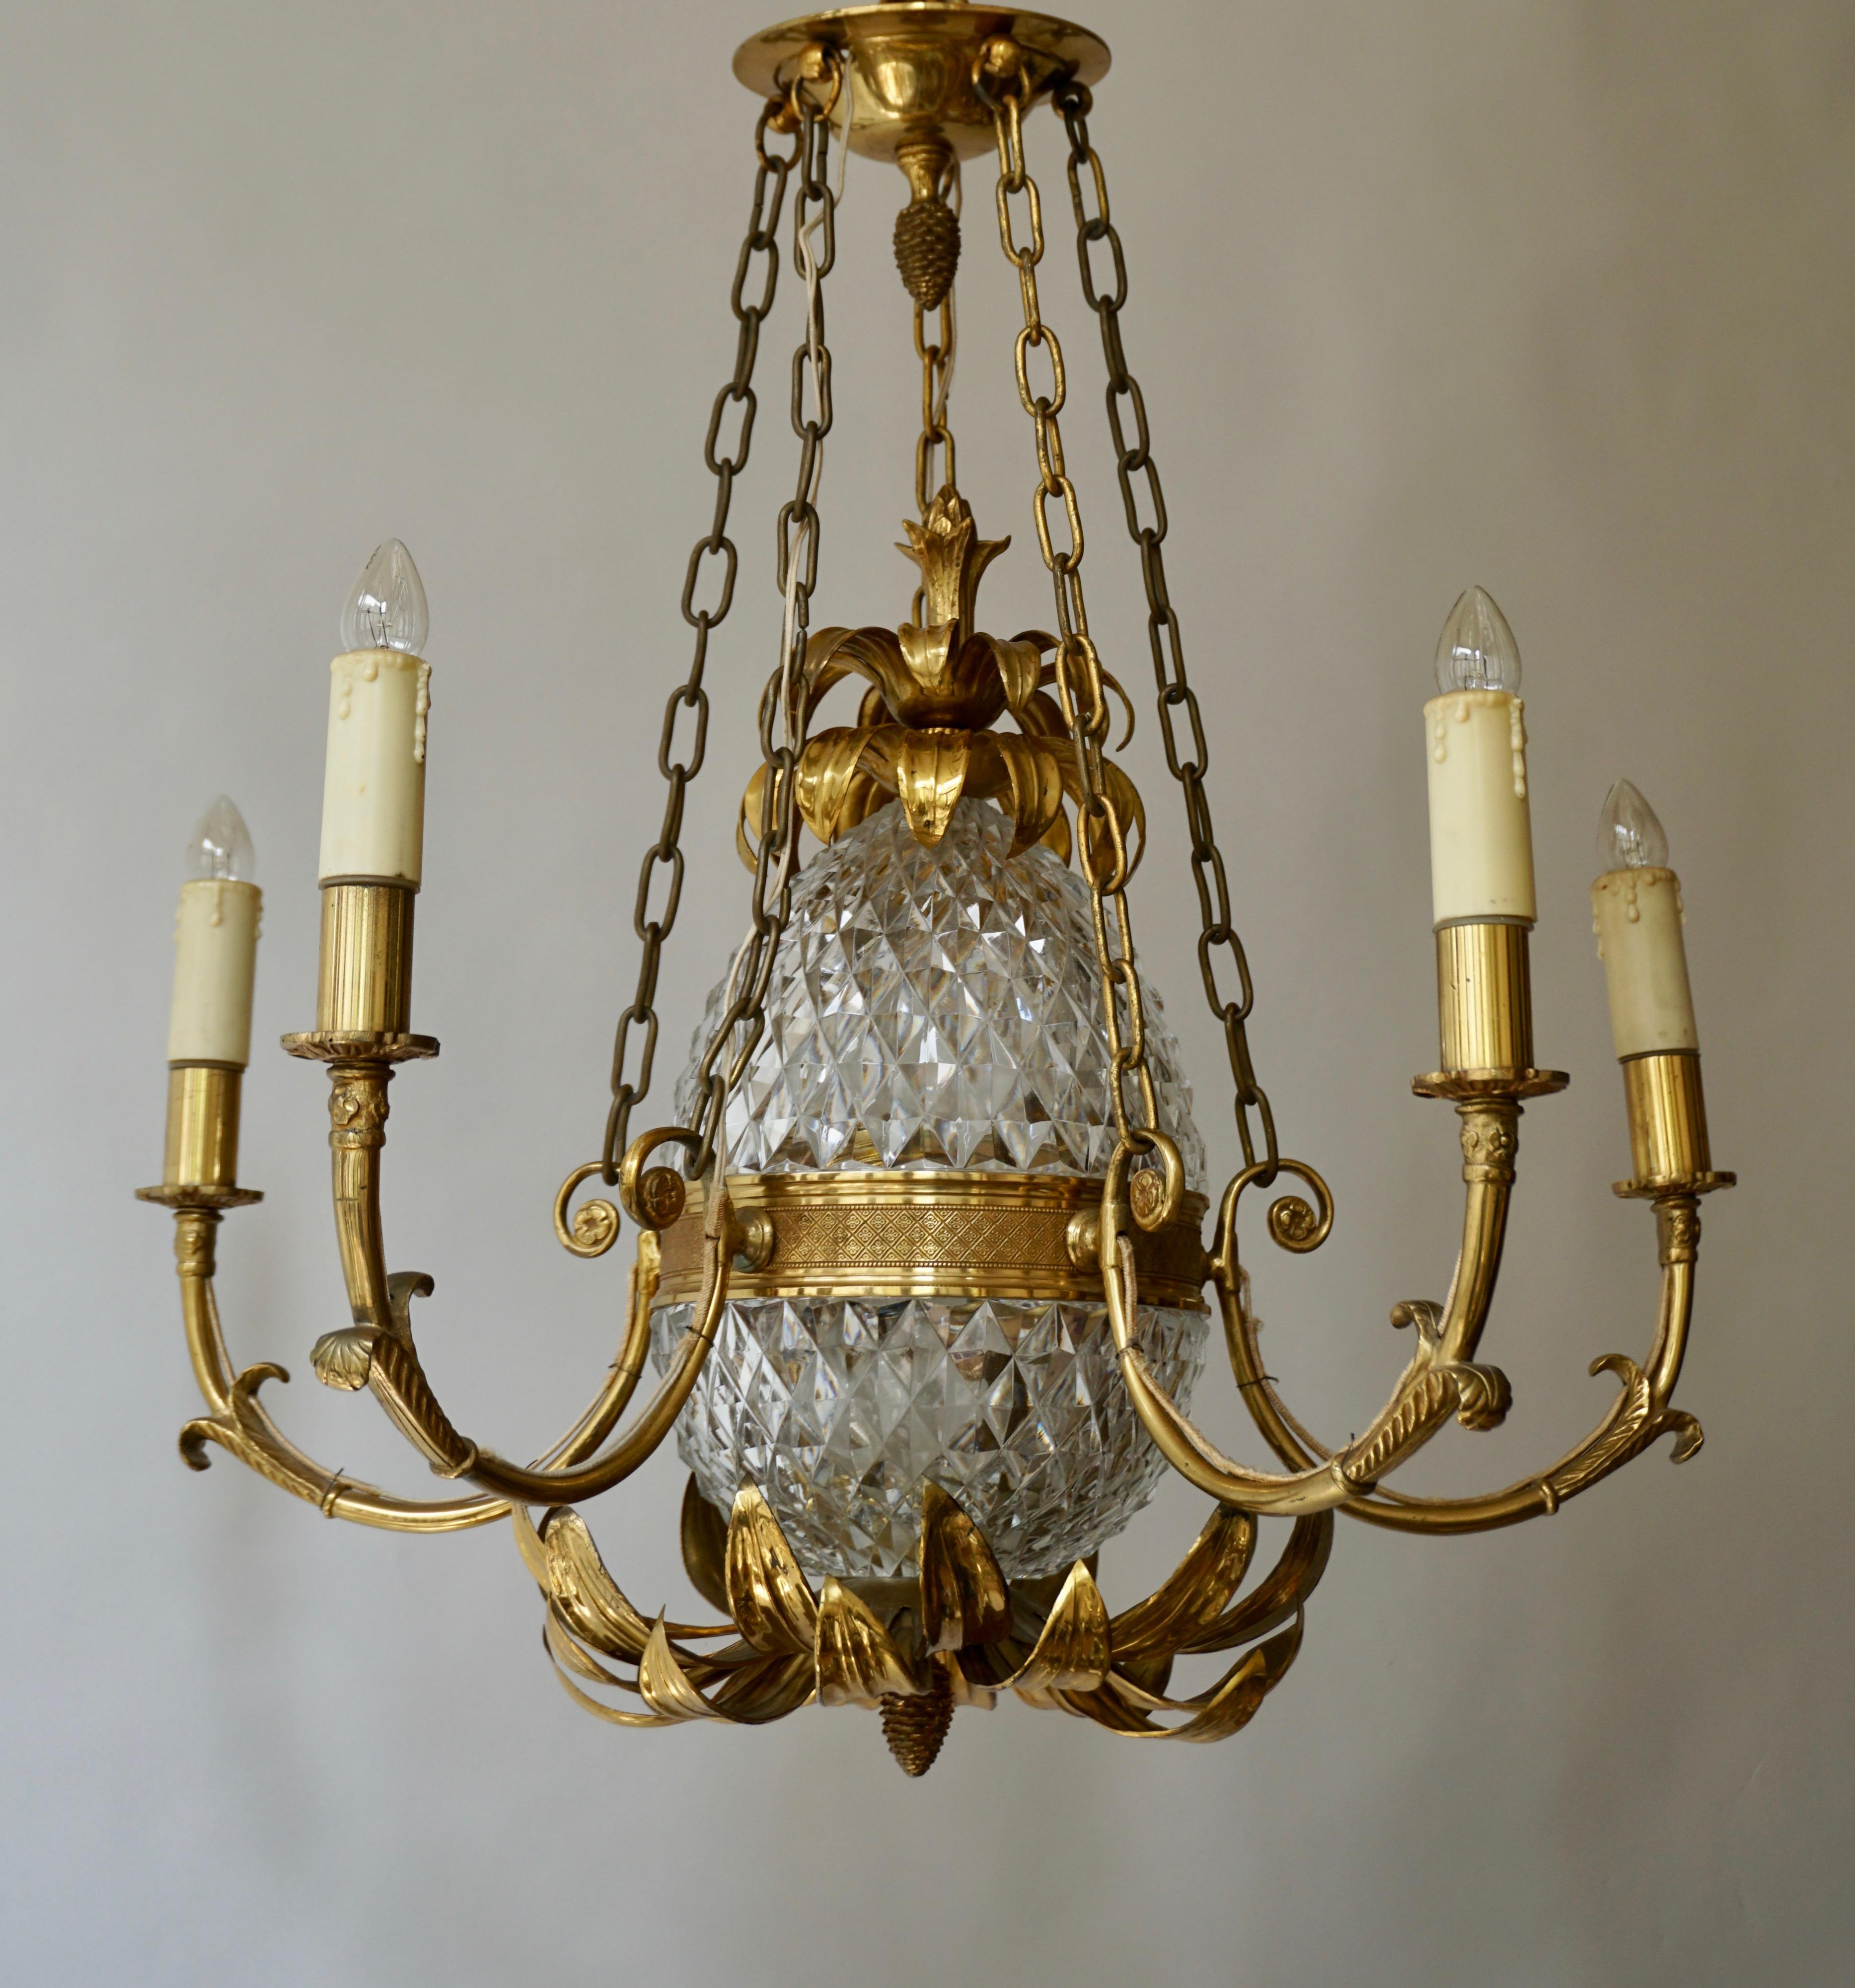 Brass and Cut Crystal Pineapple Chandelier with 5-Arm Light In Good Condition For Sale In Antwerp, BE